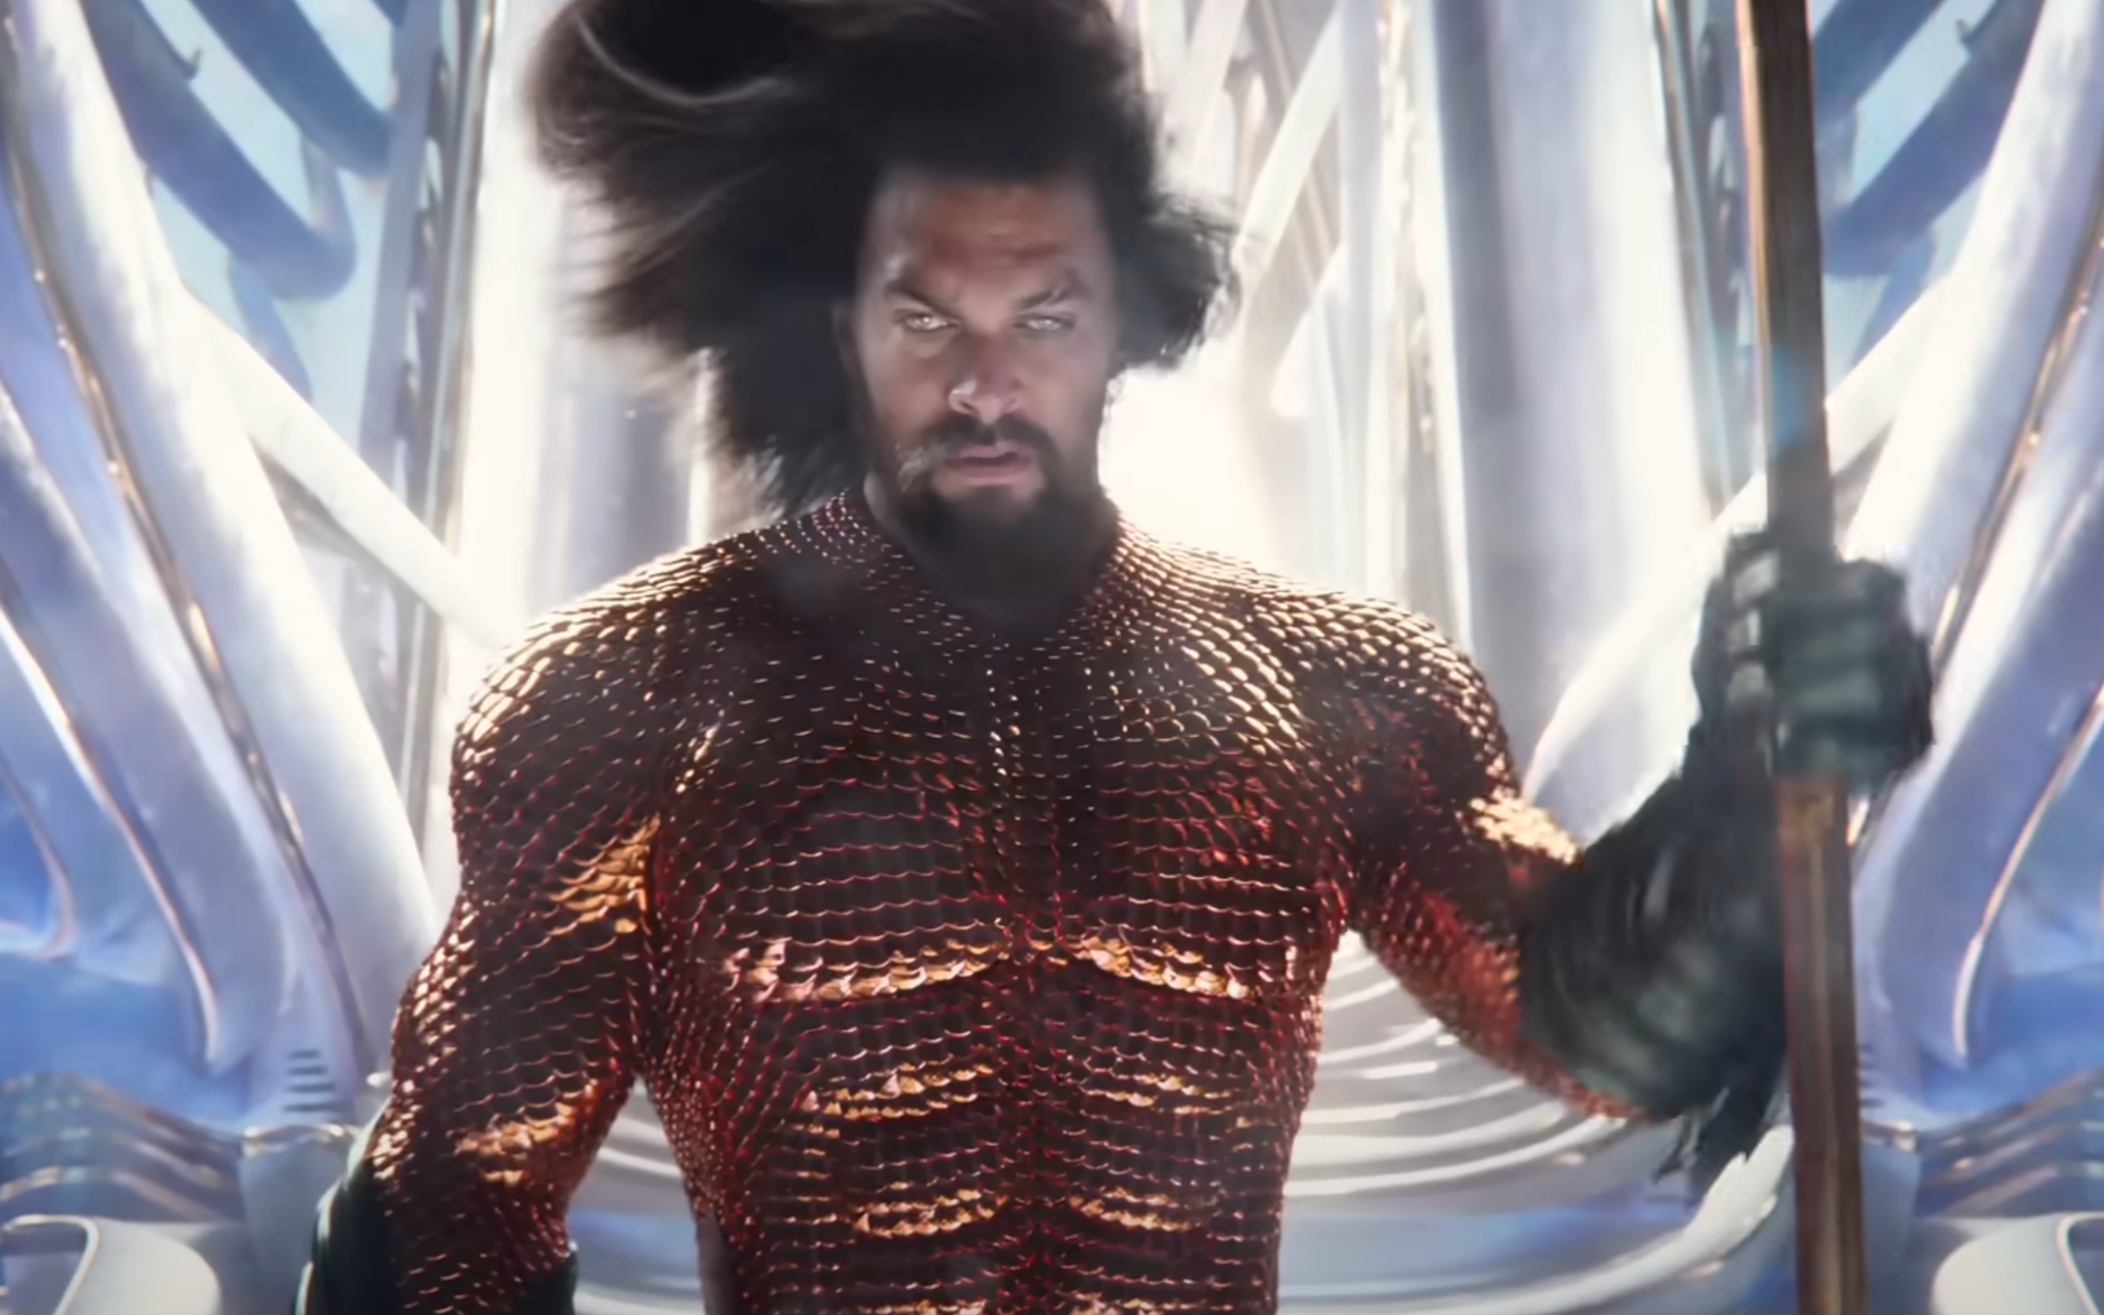 Aquaman 2 in the new trailer.  The trailer shows off more footage from the latest DC Extended Universe film